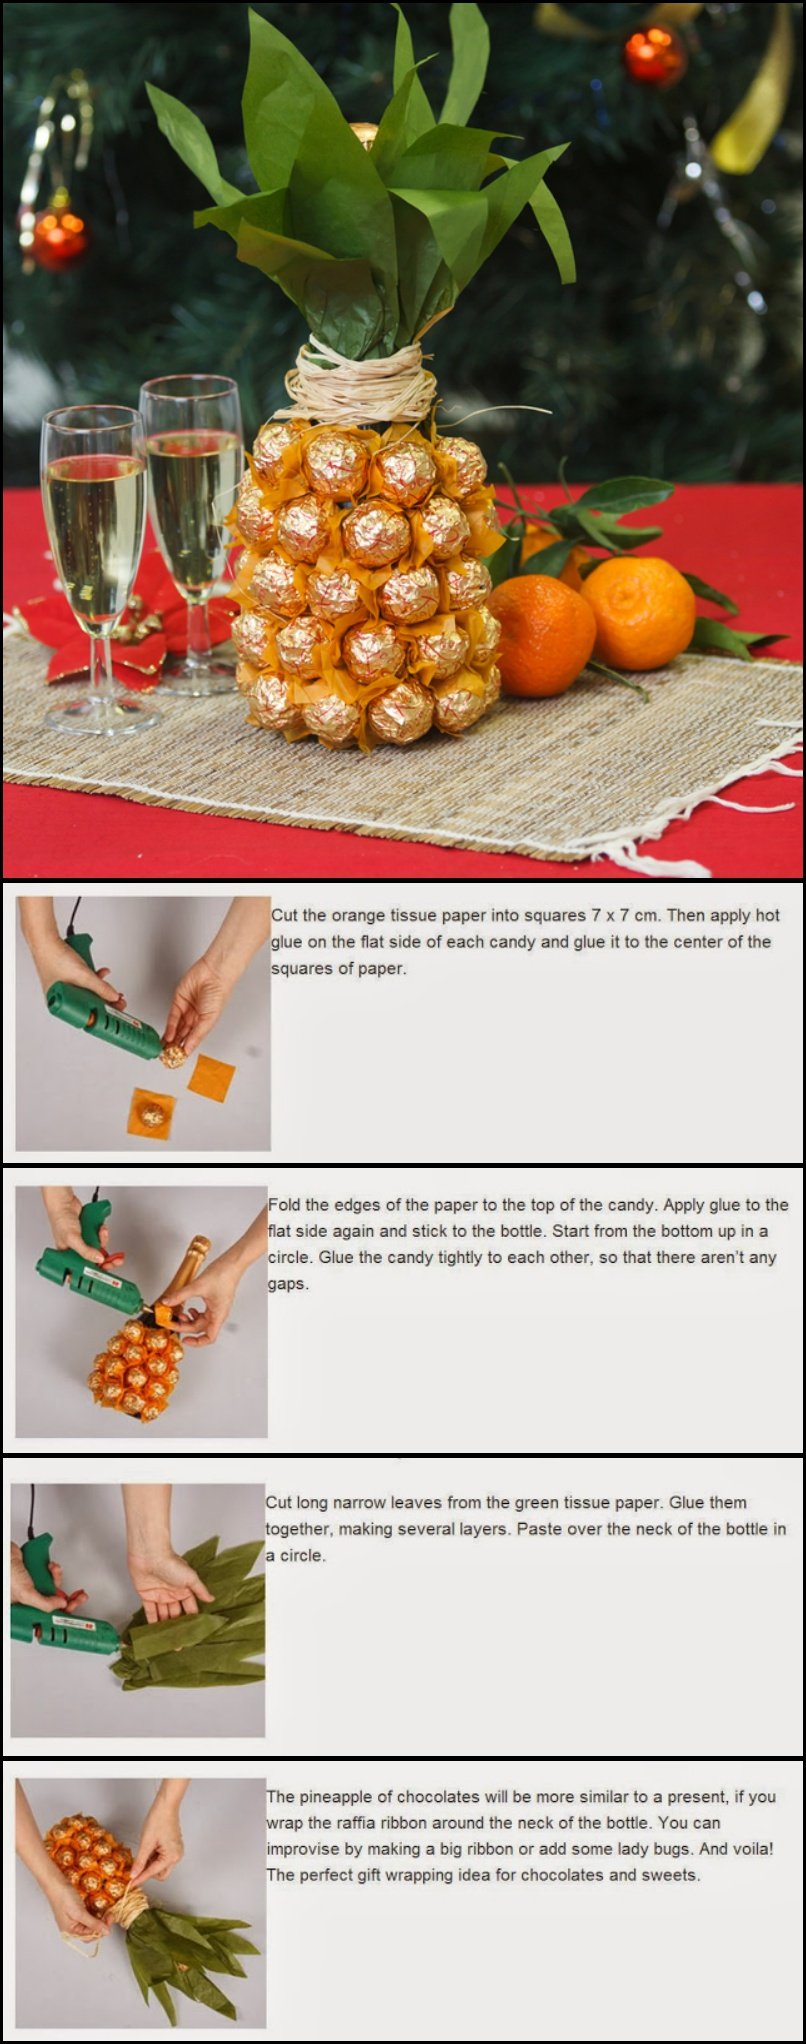 Creative Gift Wrap A Champagne Bottle Like A Pineapple With